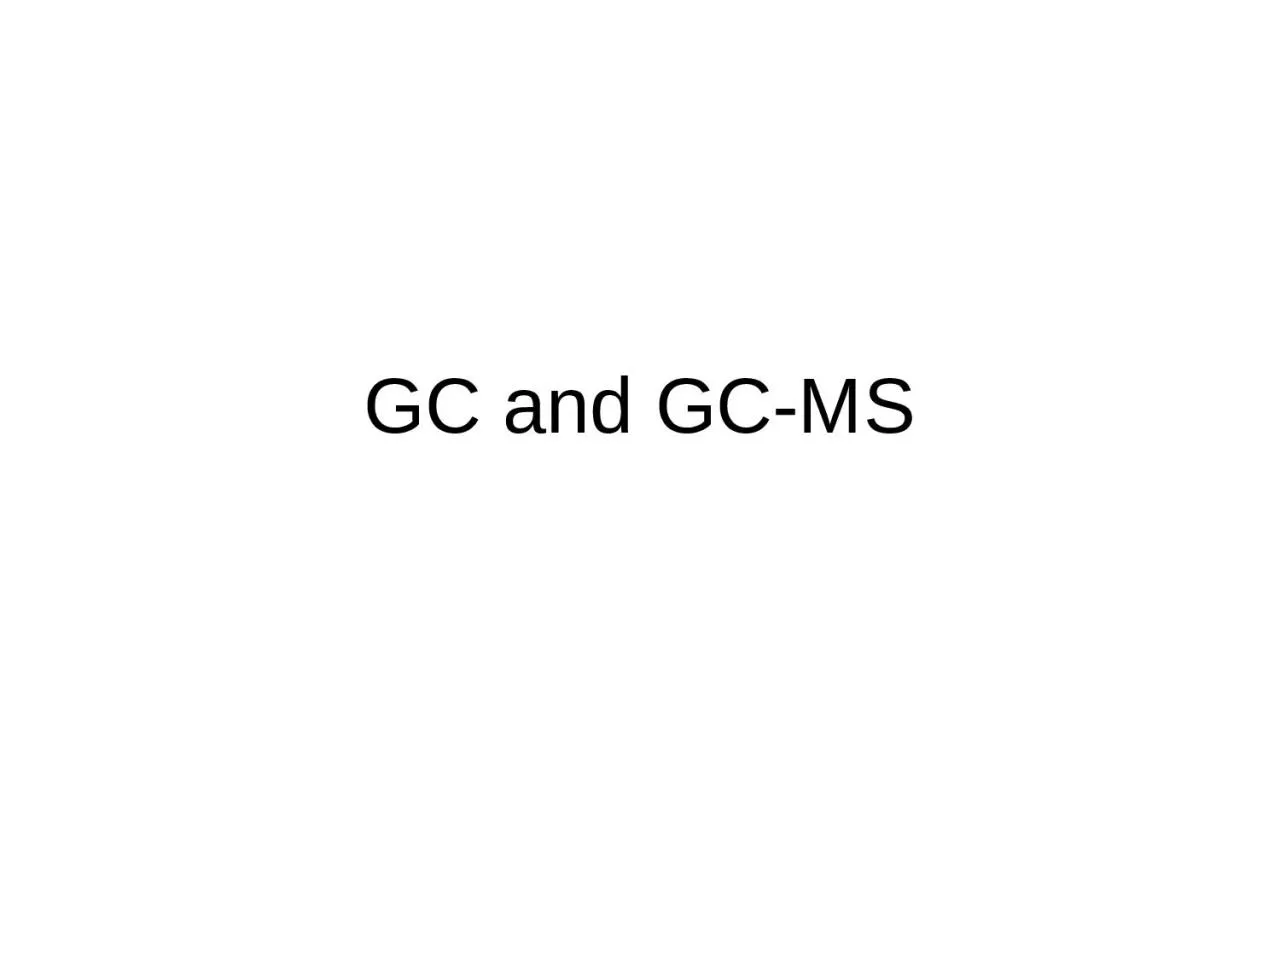 GC and GC-MS Gas Chromatography